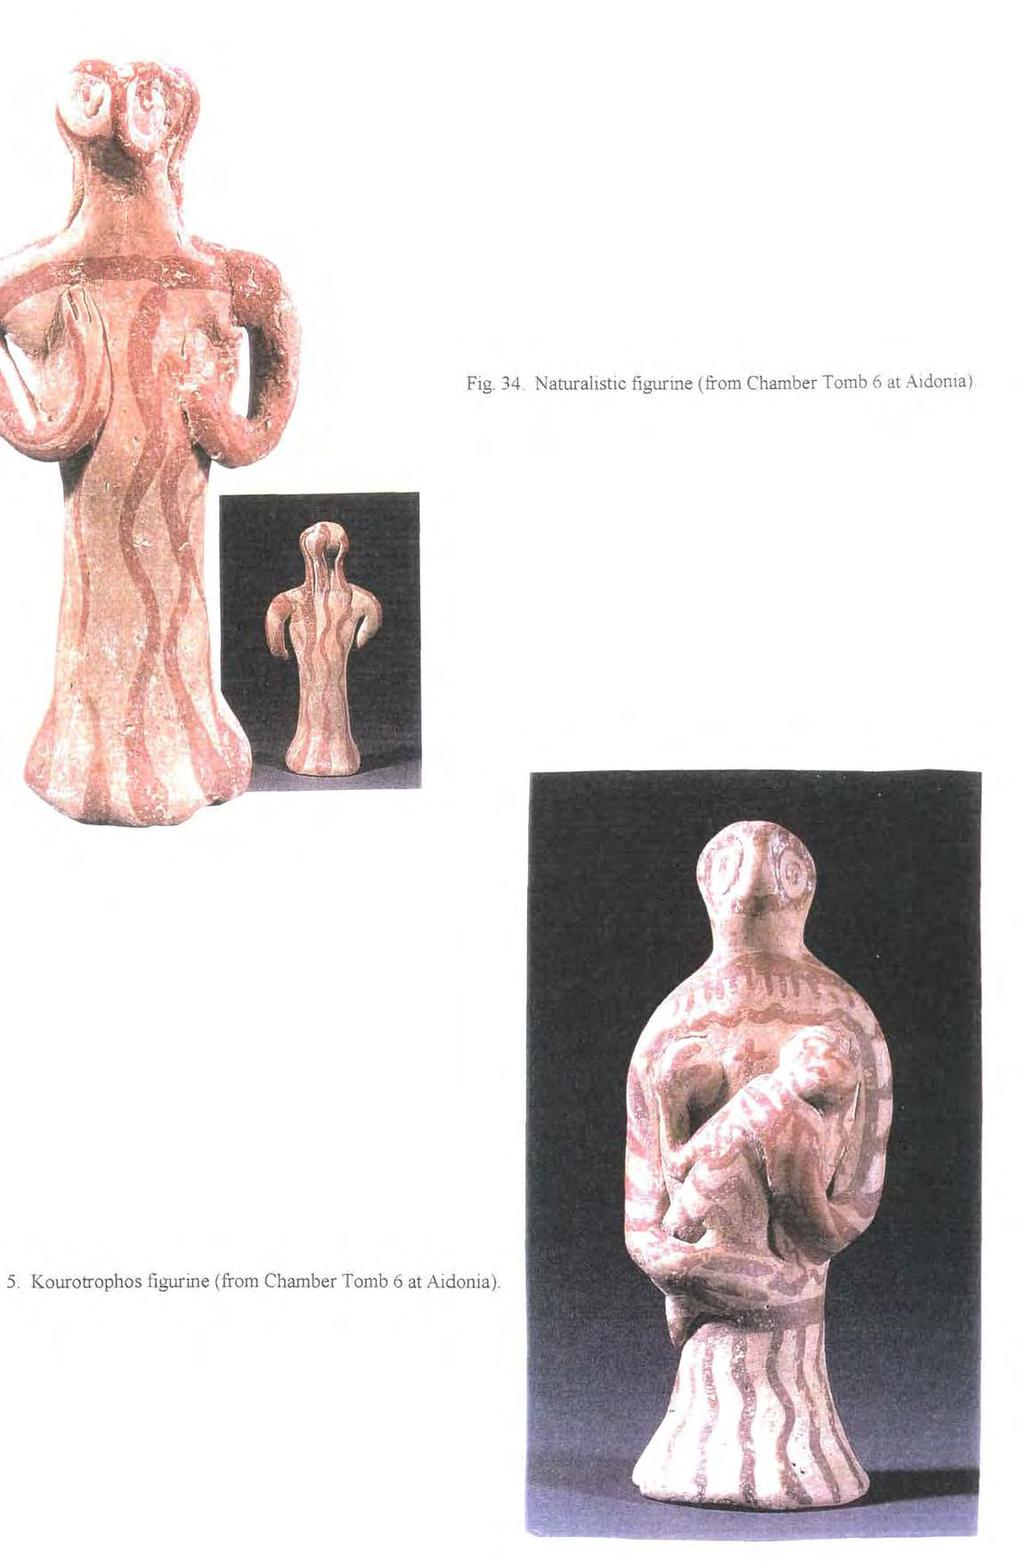 5. Kourotrophos figurine (from Chamber Tomb 6 at Aidonia).